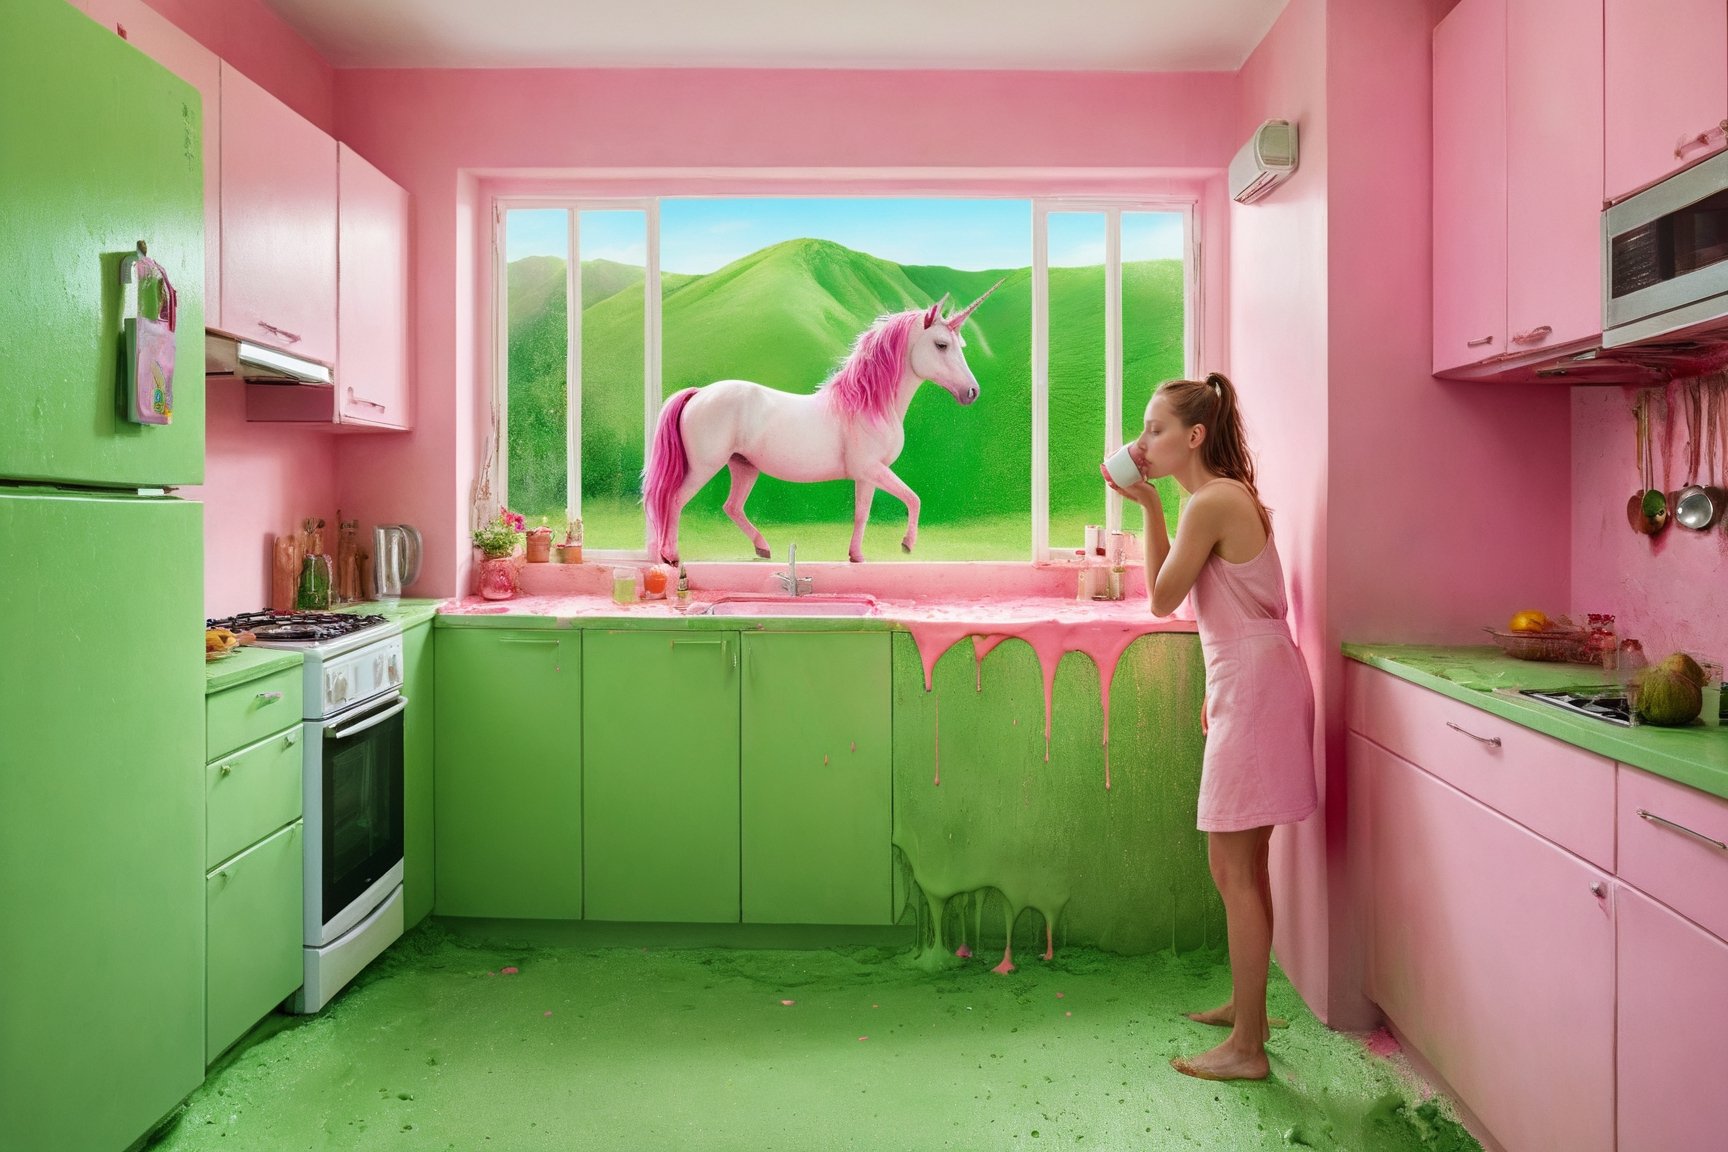 an unicorn stands in an green colored kitchen in an image with a pink splash, in the style of photo-realistic landscapes, patricia piccinini, daria endresen, mommy's on-the-phonecore, ad posters, national geographic photo, dripping paint -,xxmixgirl